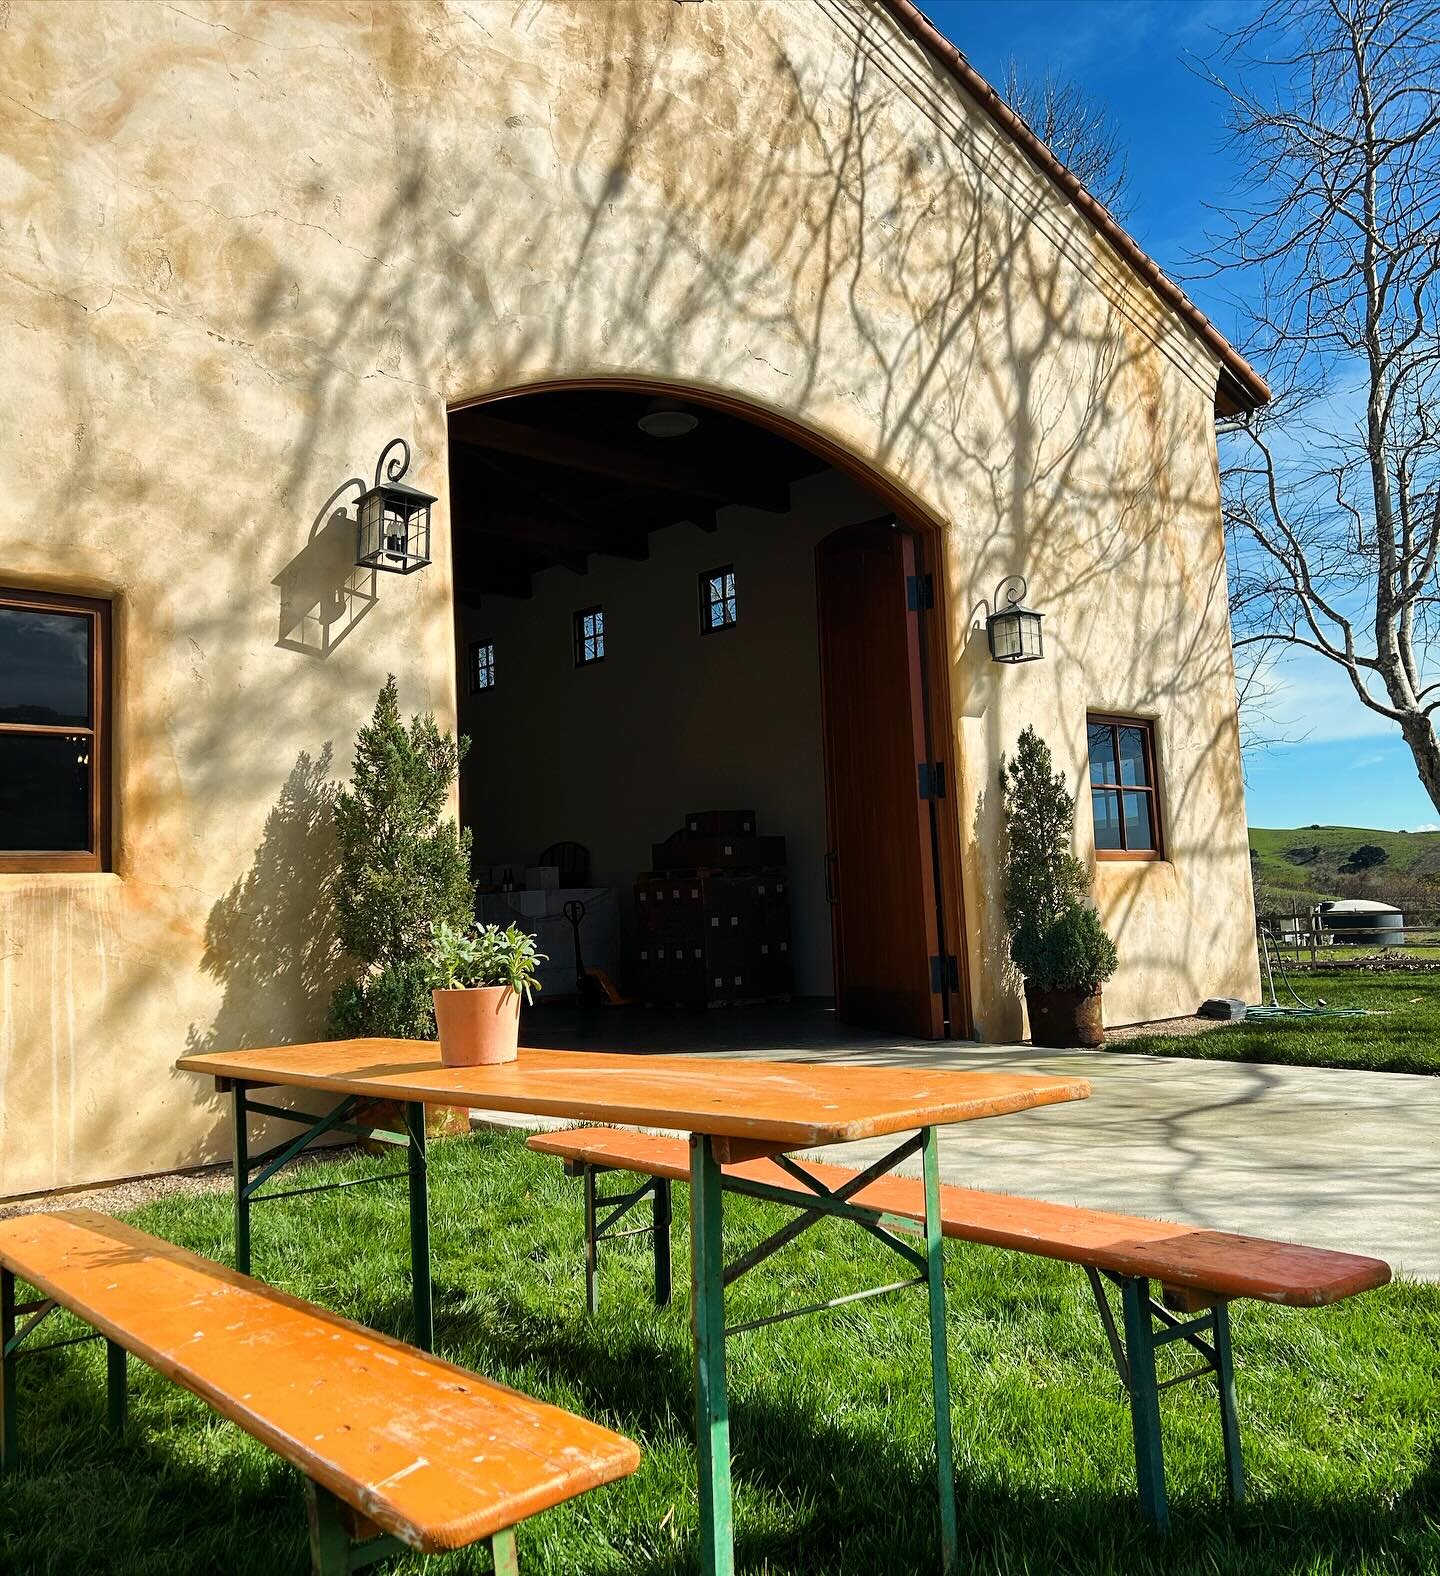 Embracing the allure of our barn amidst the breathtaking beauty of Santa Rita Hills. ✨#VineyardVibes #Slay